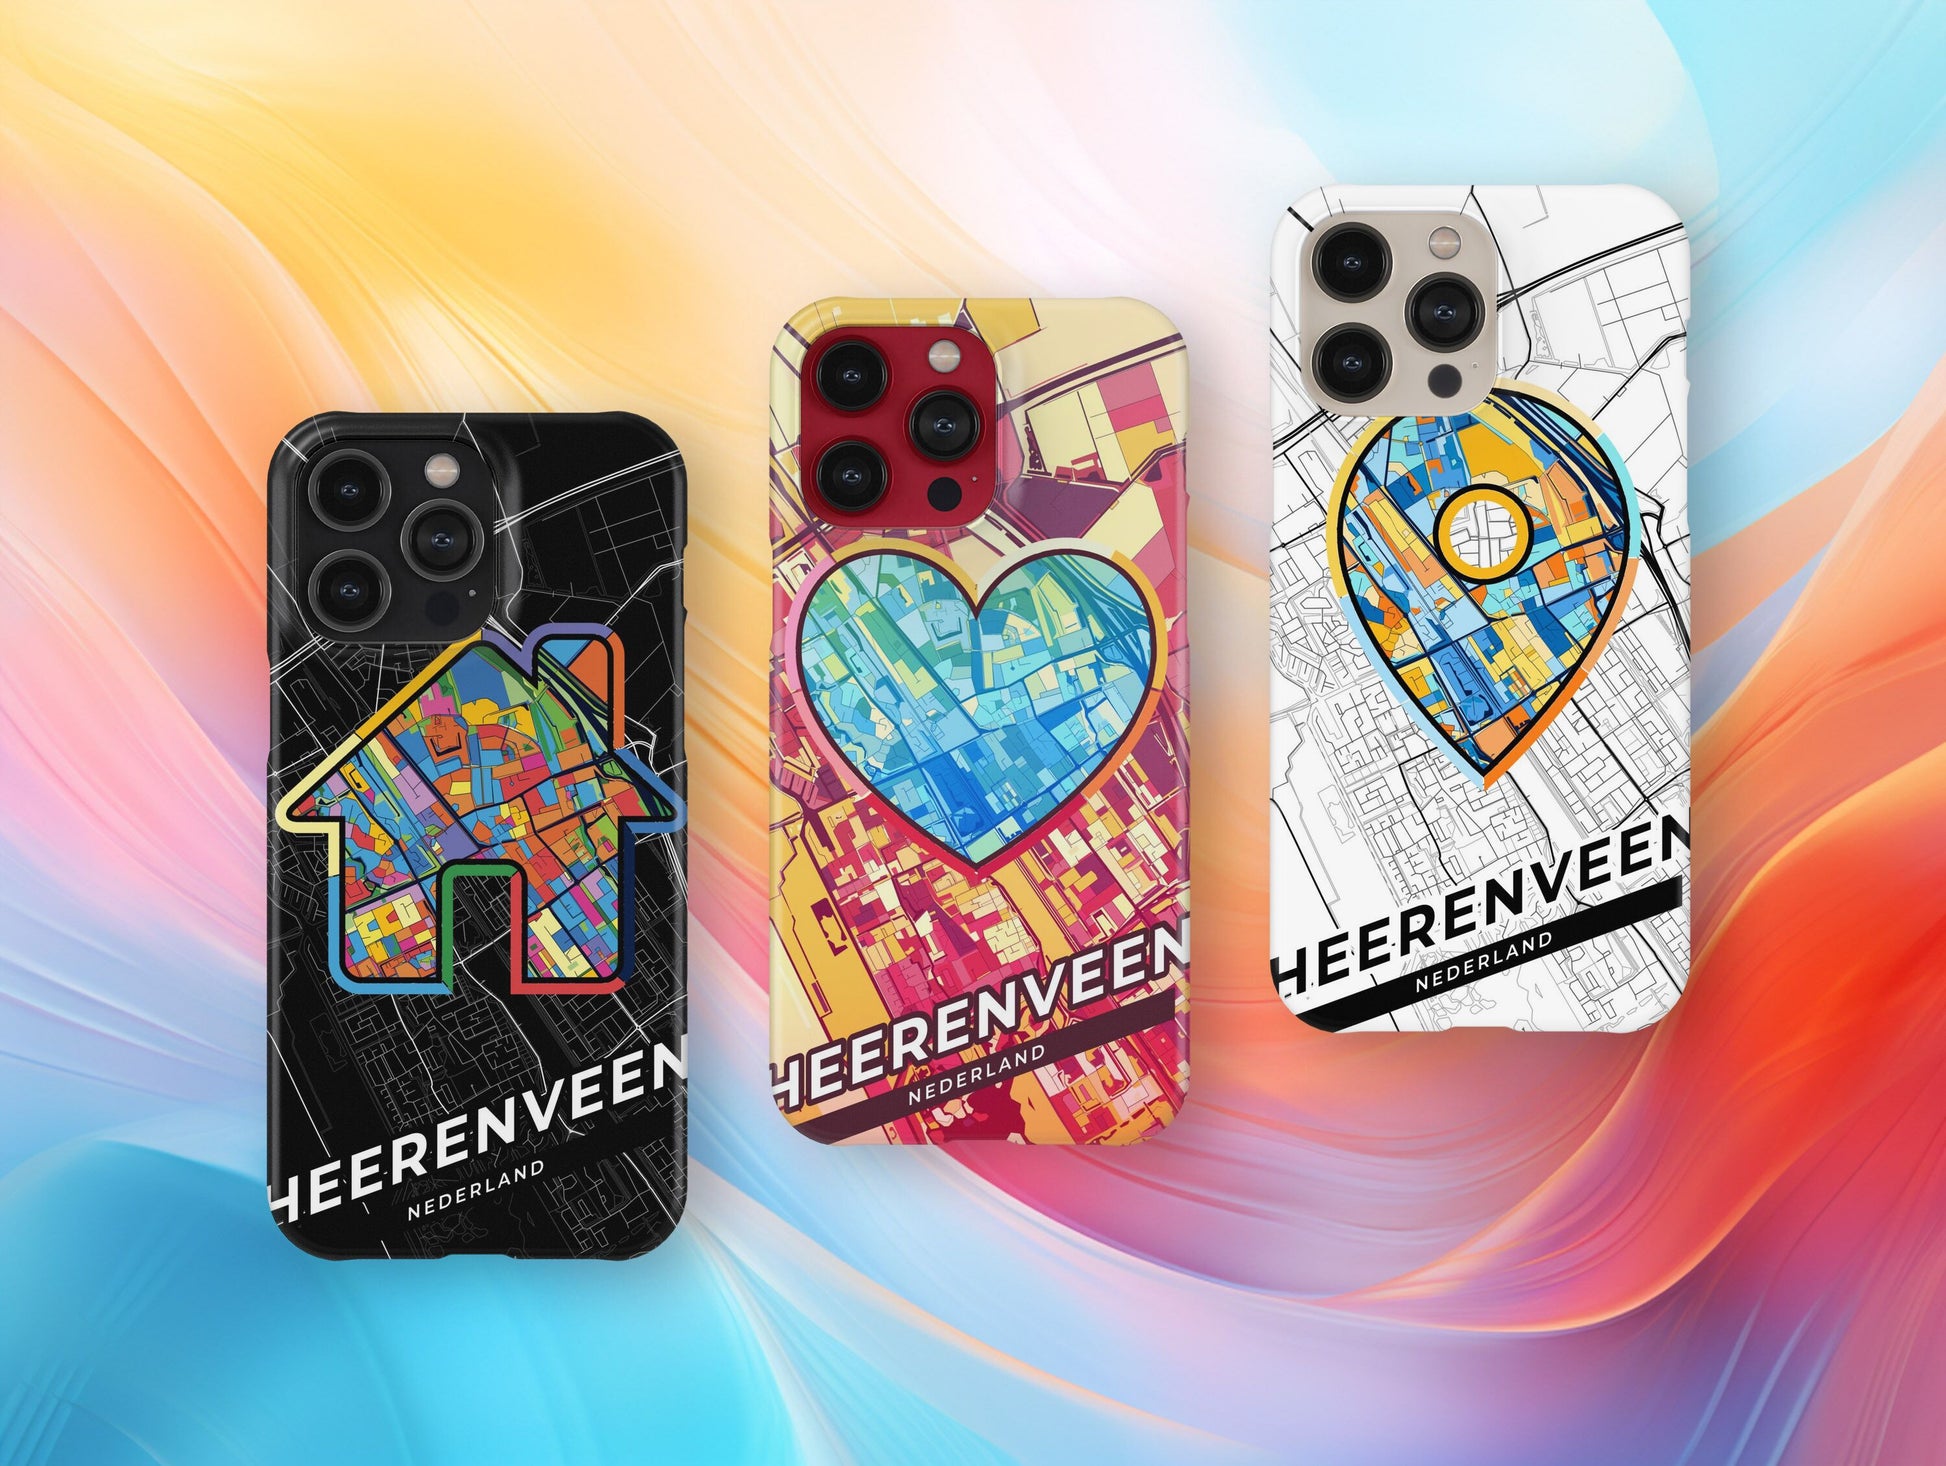 Heerenveen Netherlands slim phone case with colorful icon. Birthday, wedding or housewarming gift. Couple match cases.